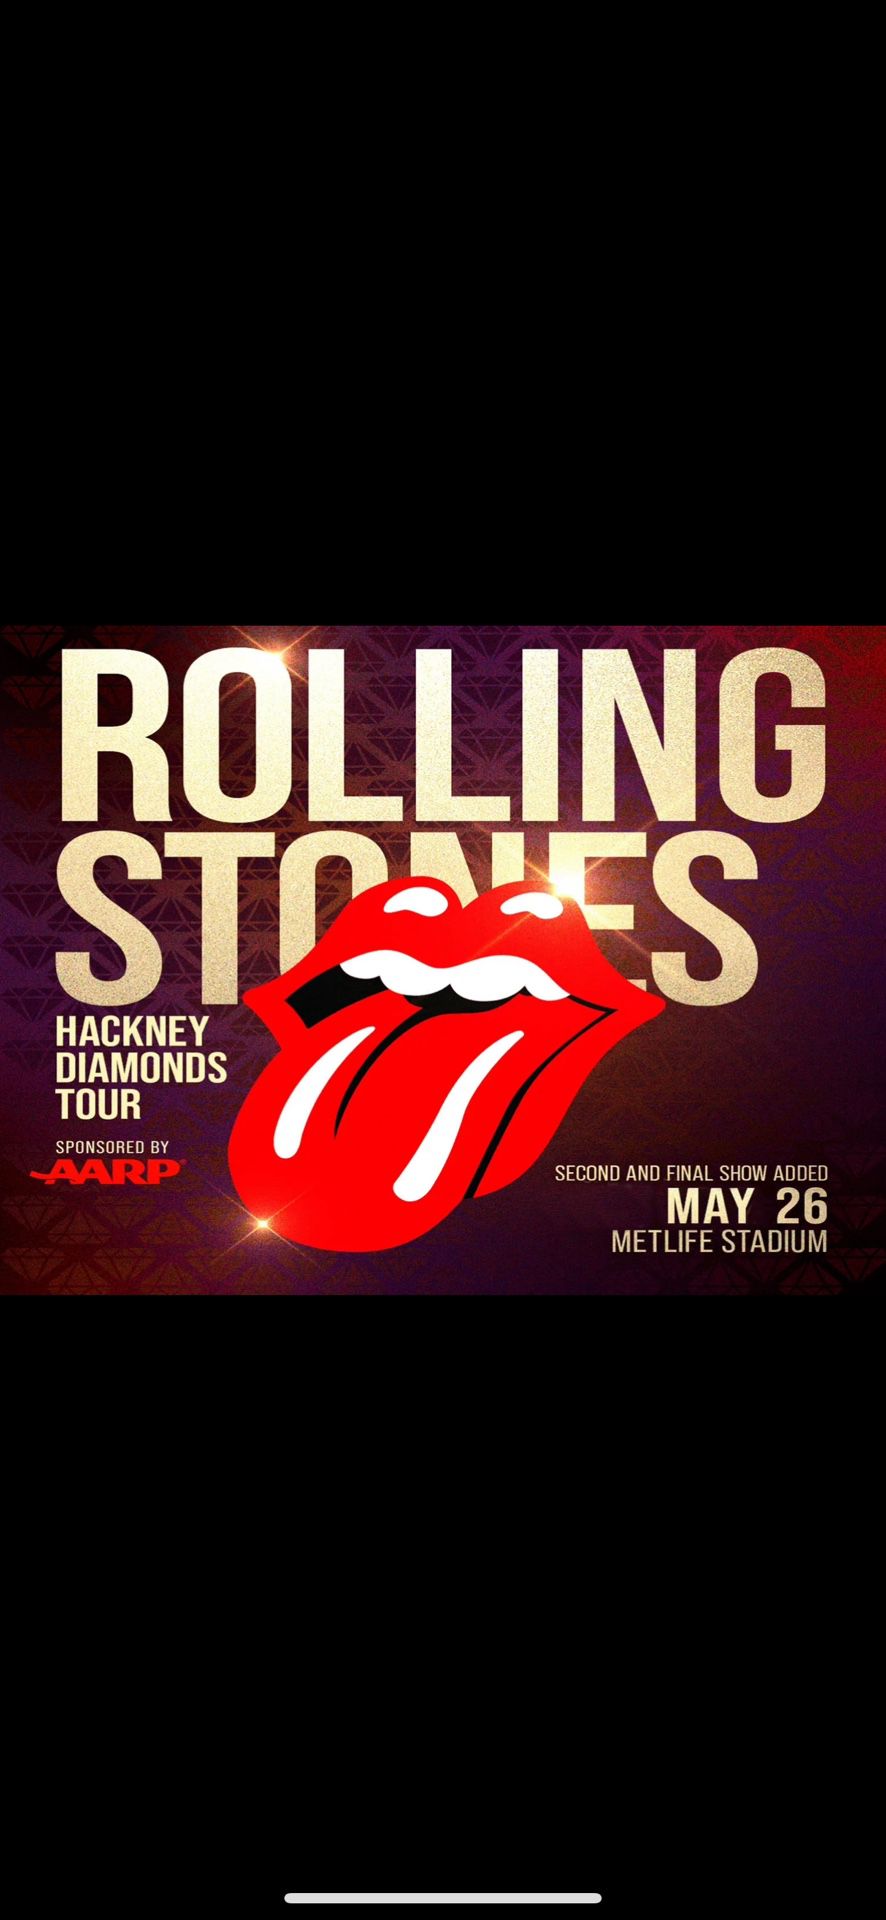 Rolling Stones Tickets For Sale - May 26/Section 2/Row 33